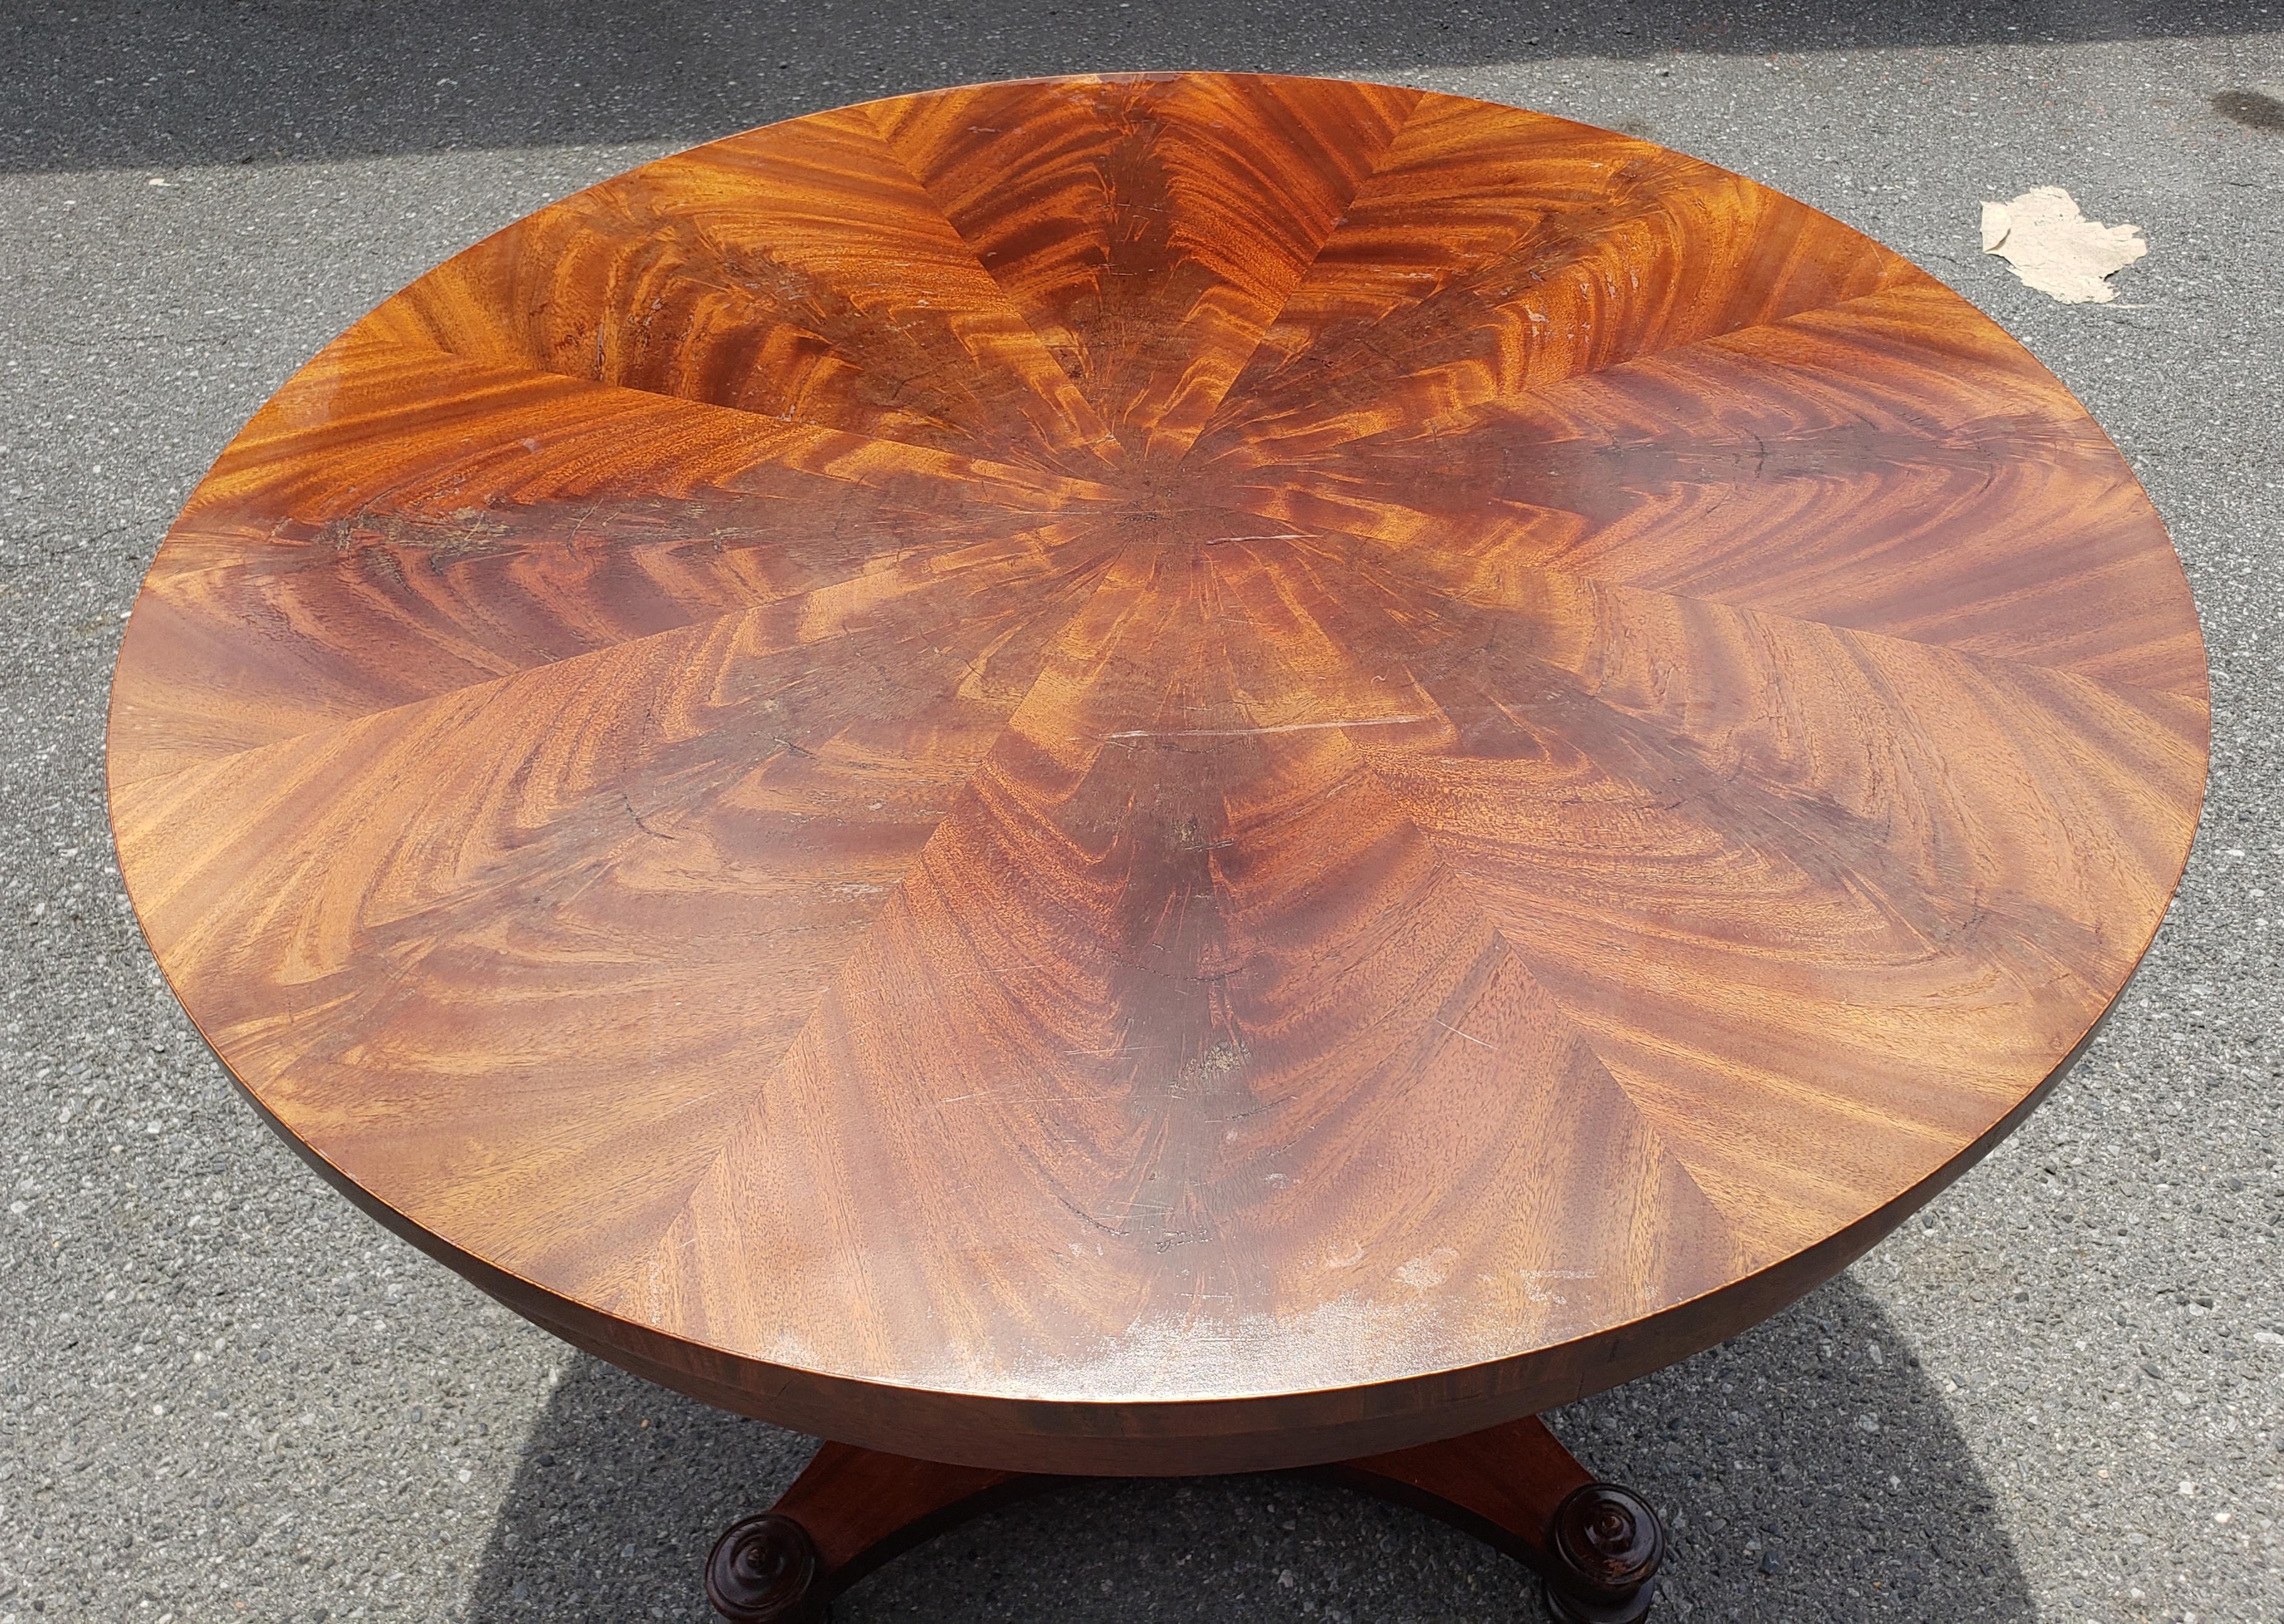 Wood Late 20th Century Swirl Mahogany Breakfast Table or Center Table